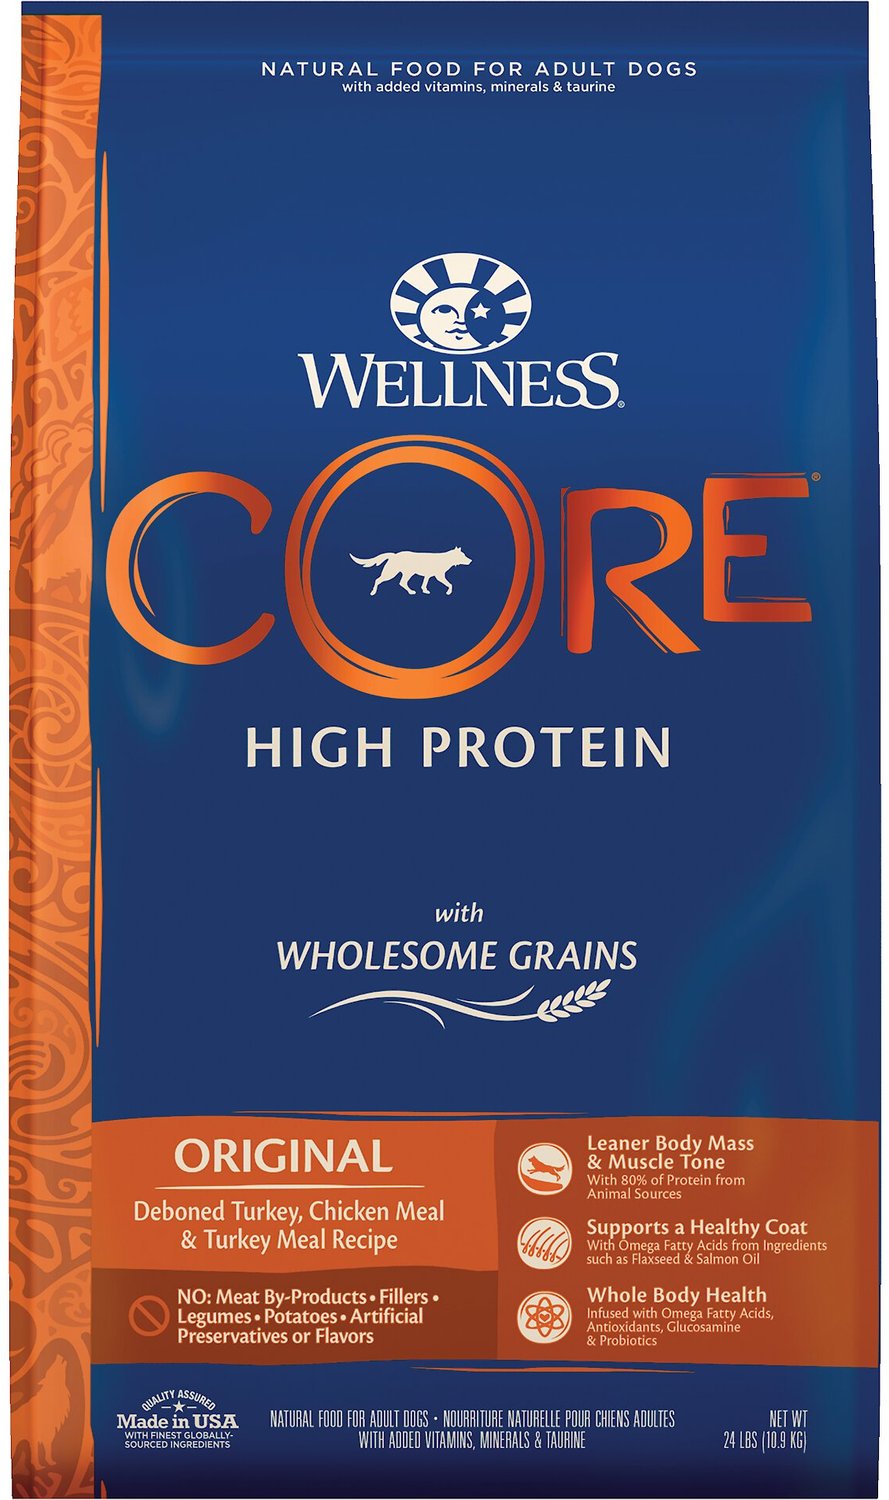 Wellness CORE Wholesome Grains Original Recipe High Protein Dry Dog Food